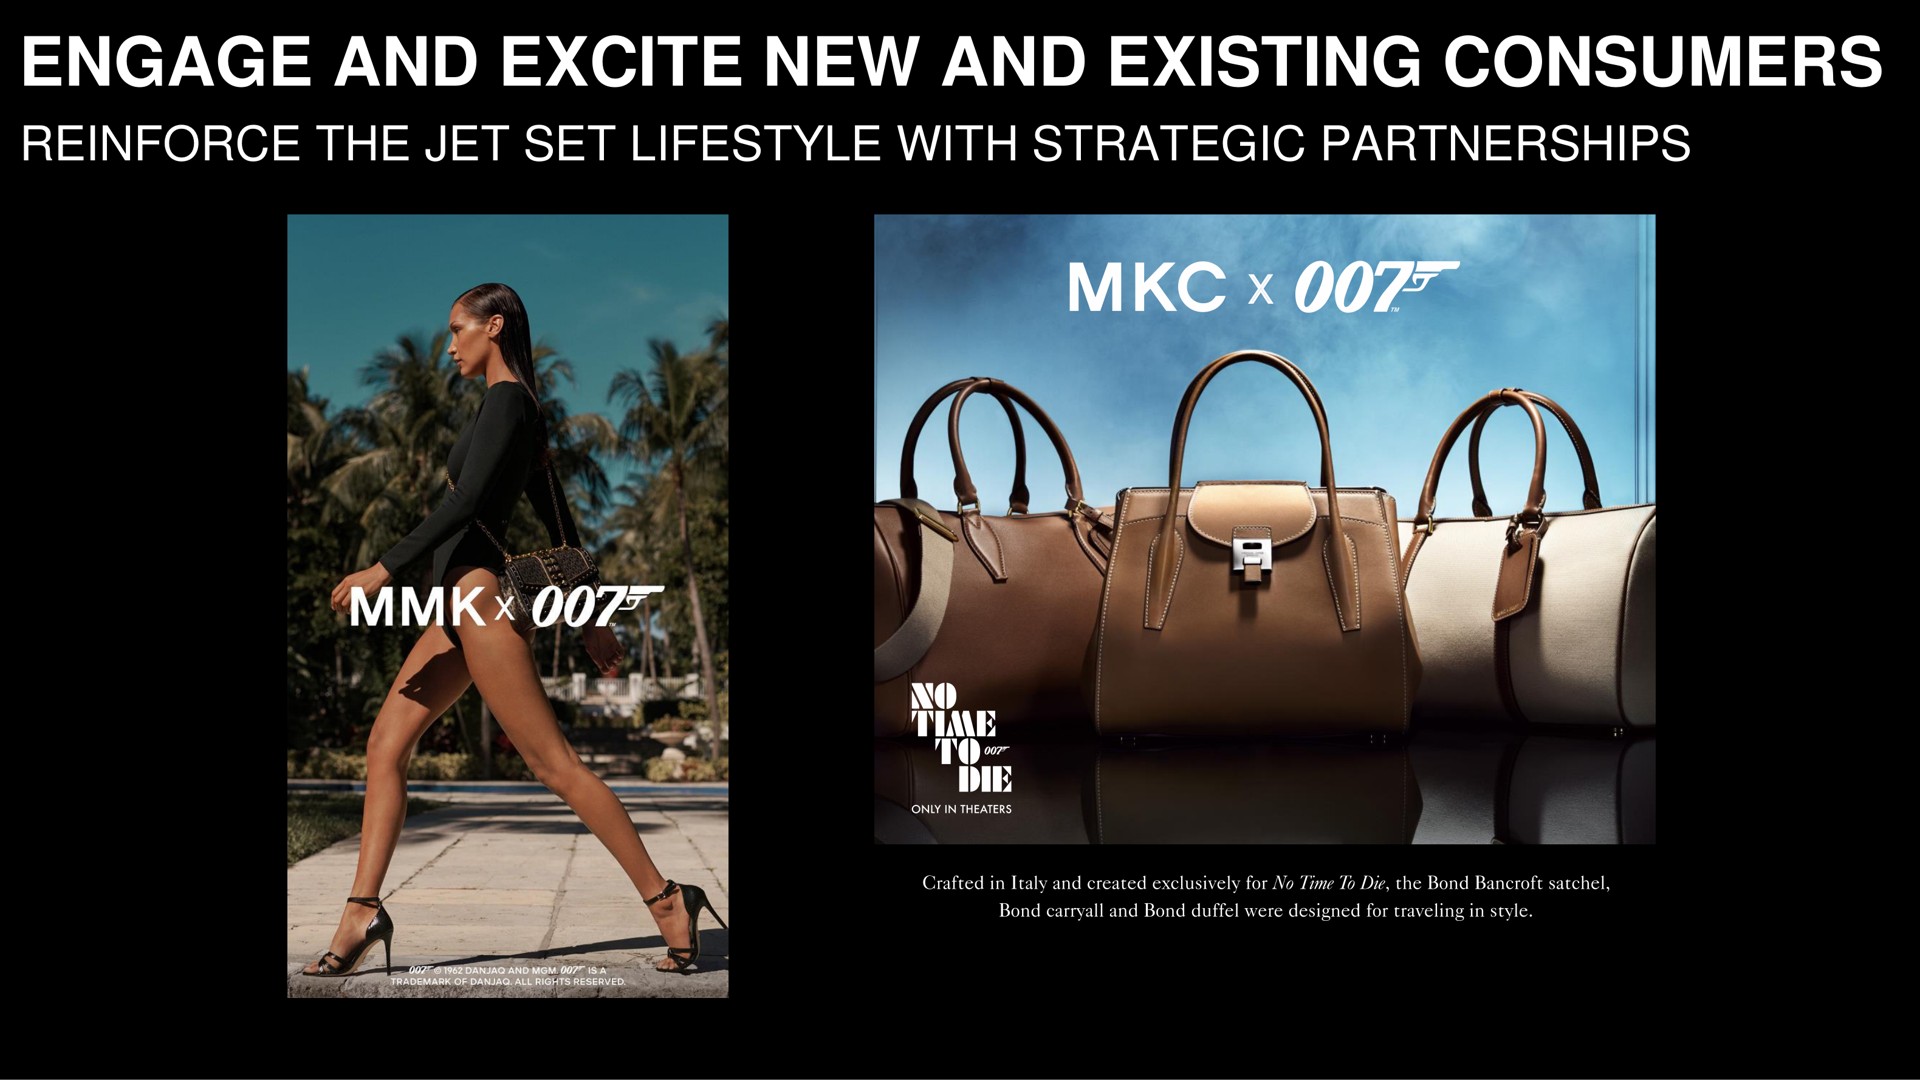 engage and excite new and existing consumers reinforce the jet set with strategic partnerships crafted in created exclusively for no time to die the bond satchel bond carryall bond duffel were designed for traveling in style | Capri Holdings